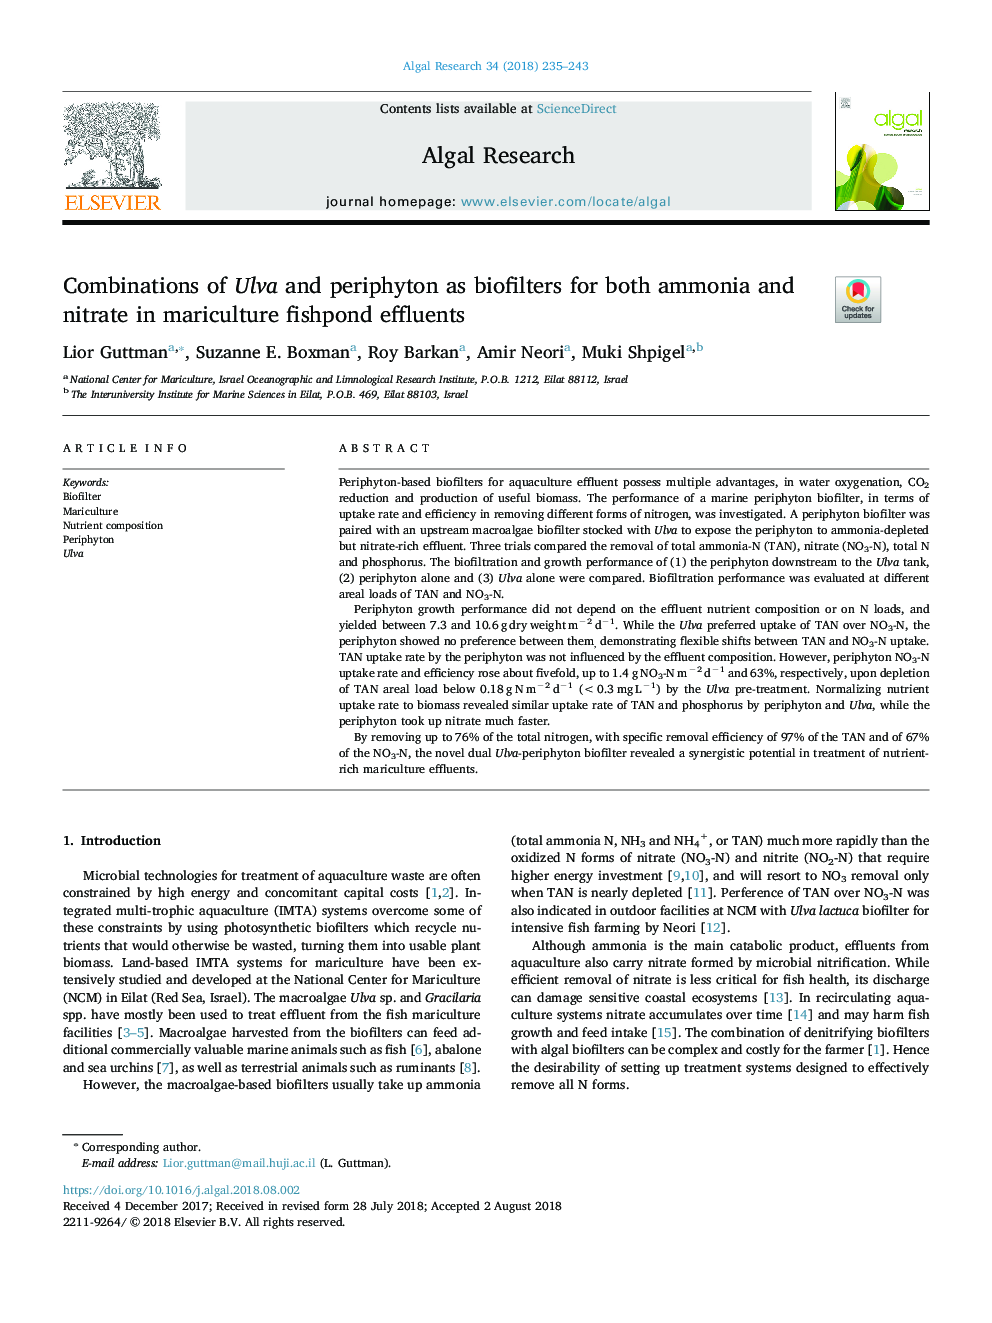 Combinations of Ulva and periphyton as biofilters for both ammonia and nitrate in mariculture fishpond effluents